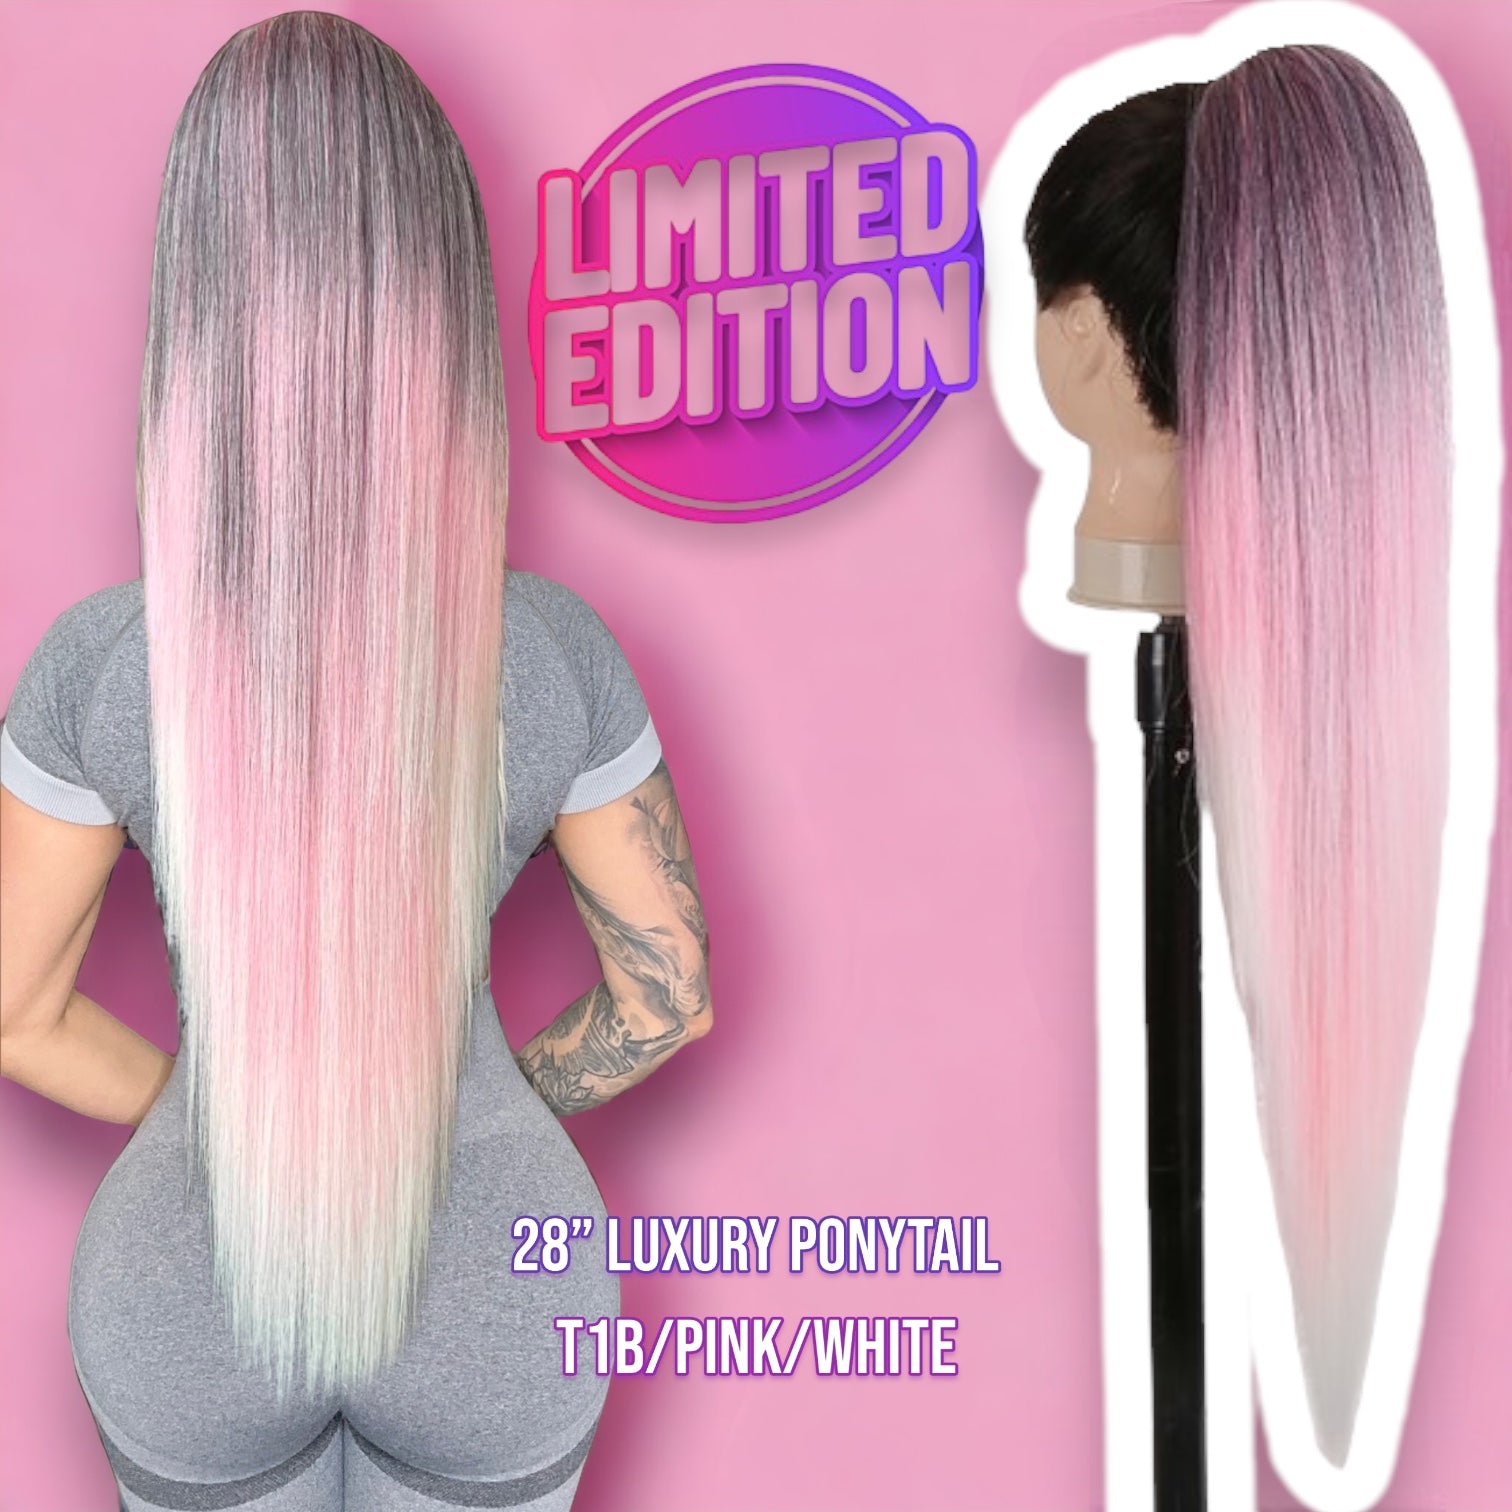 28” Special Edition Straight Luxury Ponytail Extension (T1B/Pink/White)